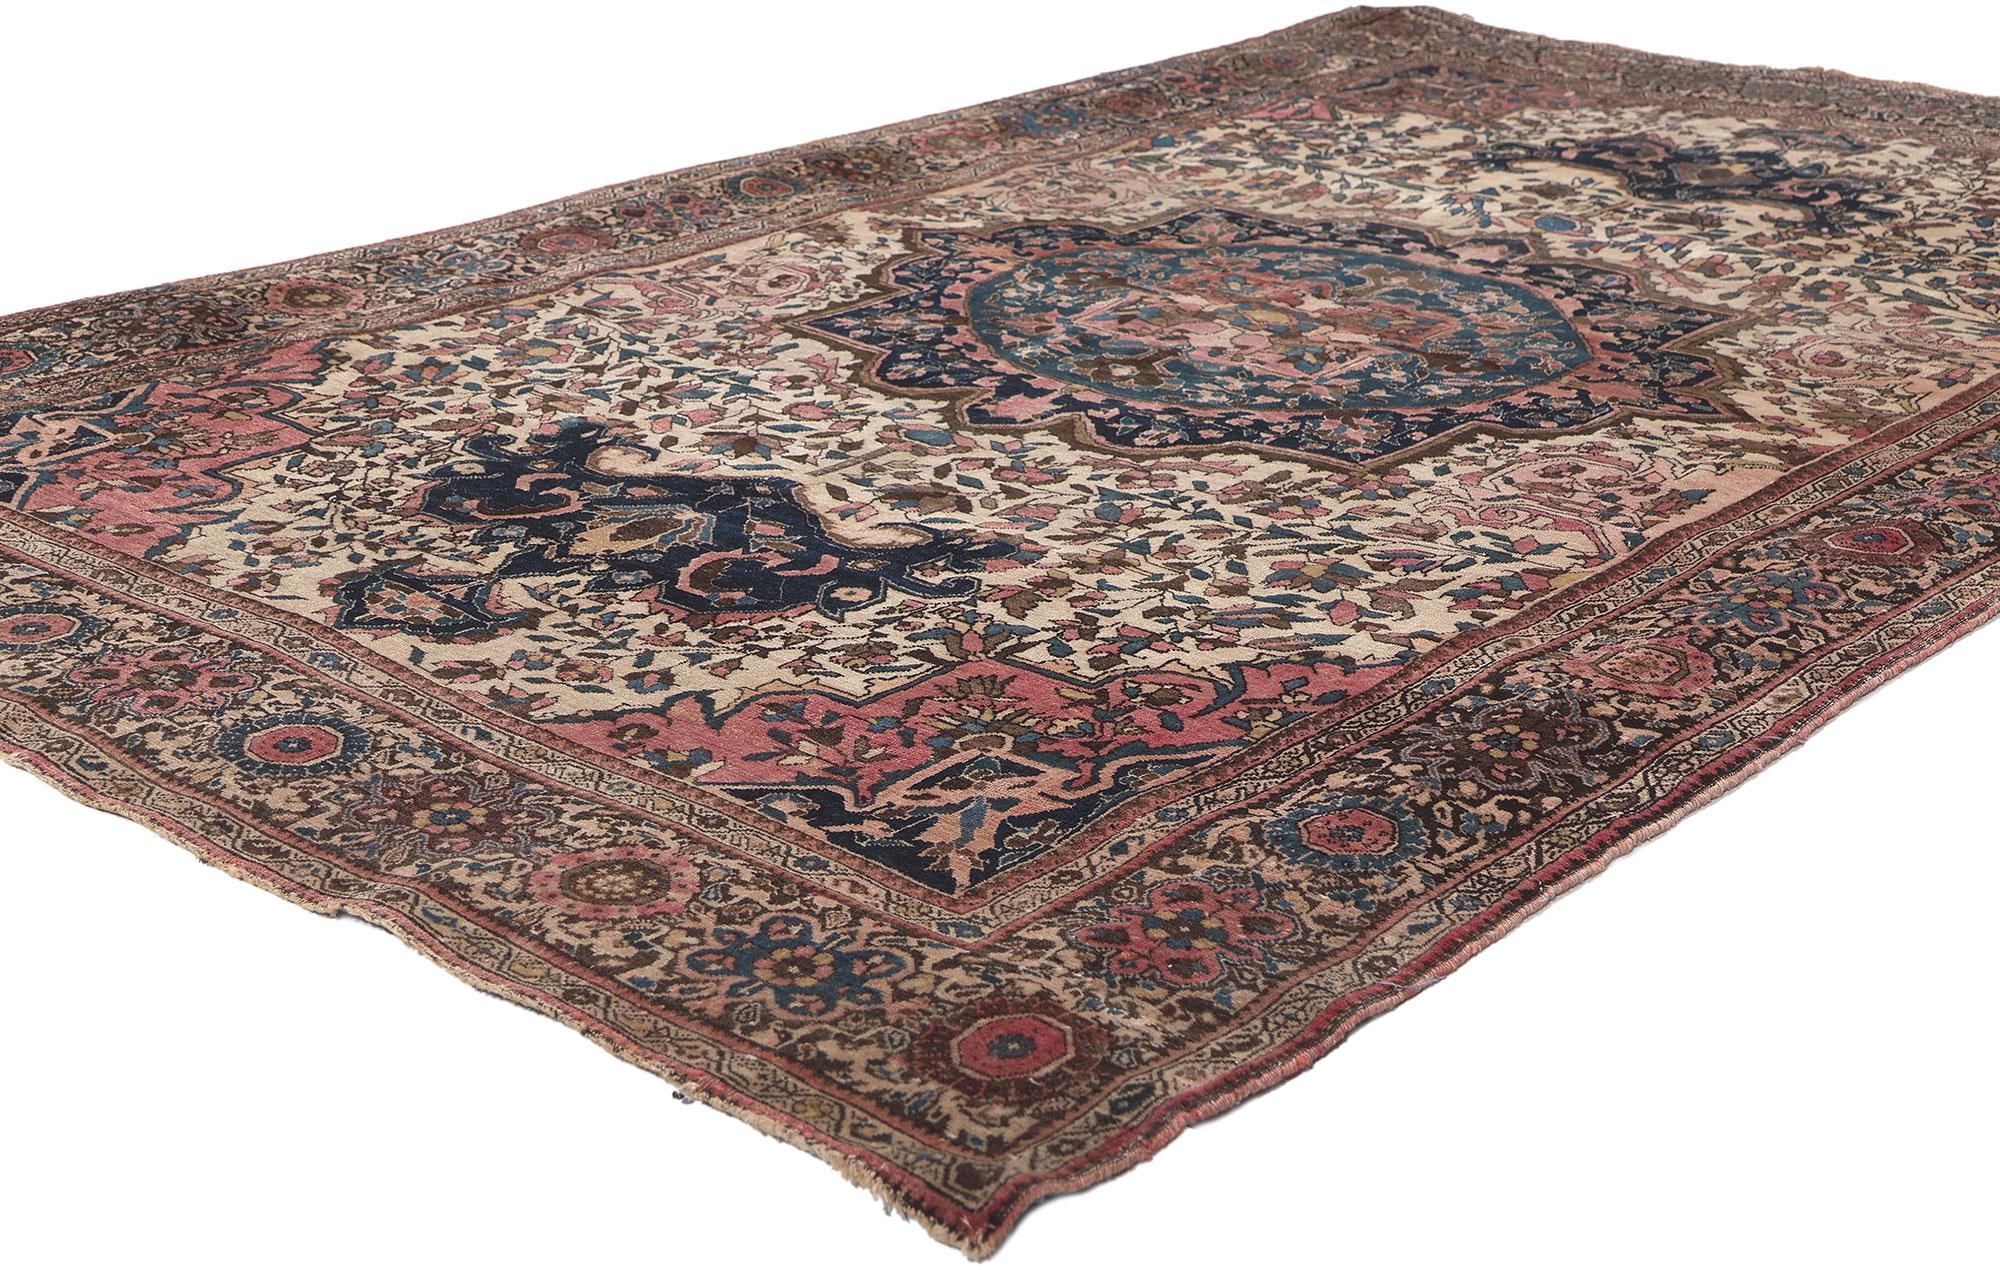 78683 Antique Persian Sarouk Farahan Rug, 04'00 x 06'05. A Sarouk rug, also spelled Saruk or Sarough, hails from Iran's Markazi Province. Meticulously crafted in the village of Saruk, the city of Arak, and the surrounding countryside, these rugs are